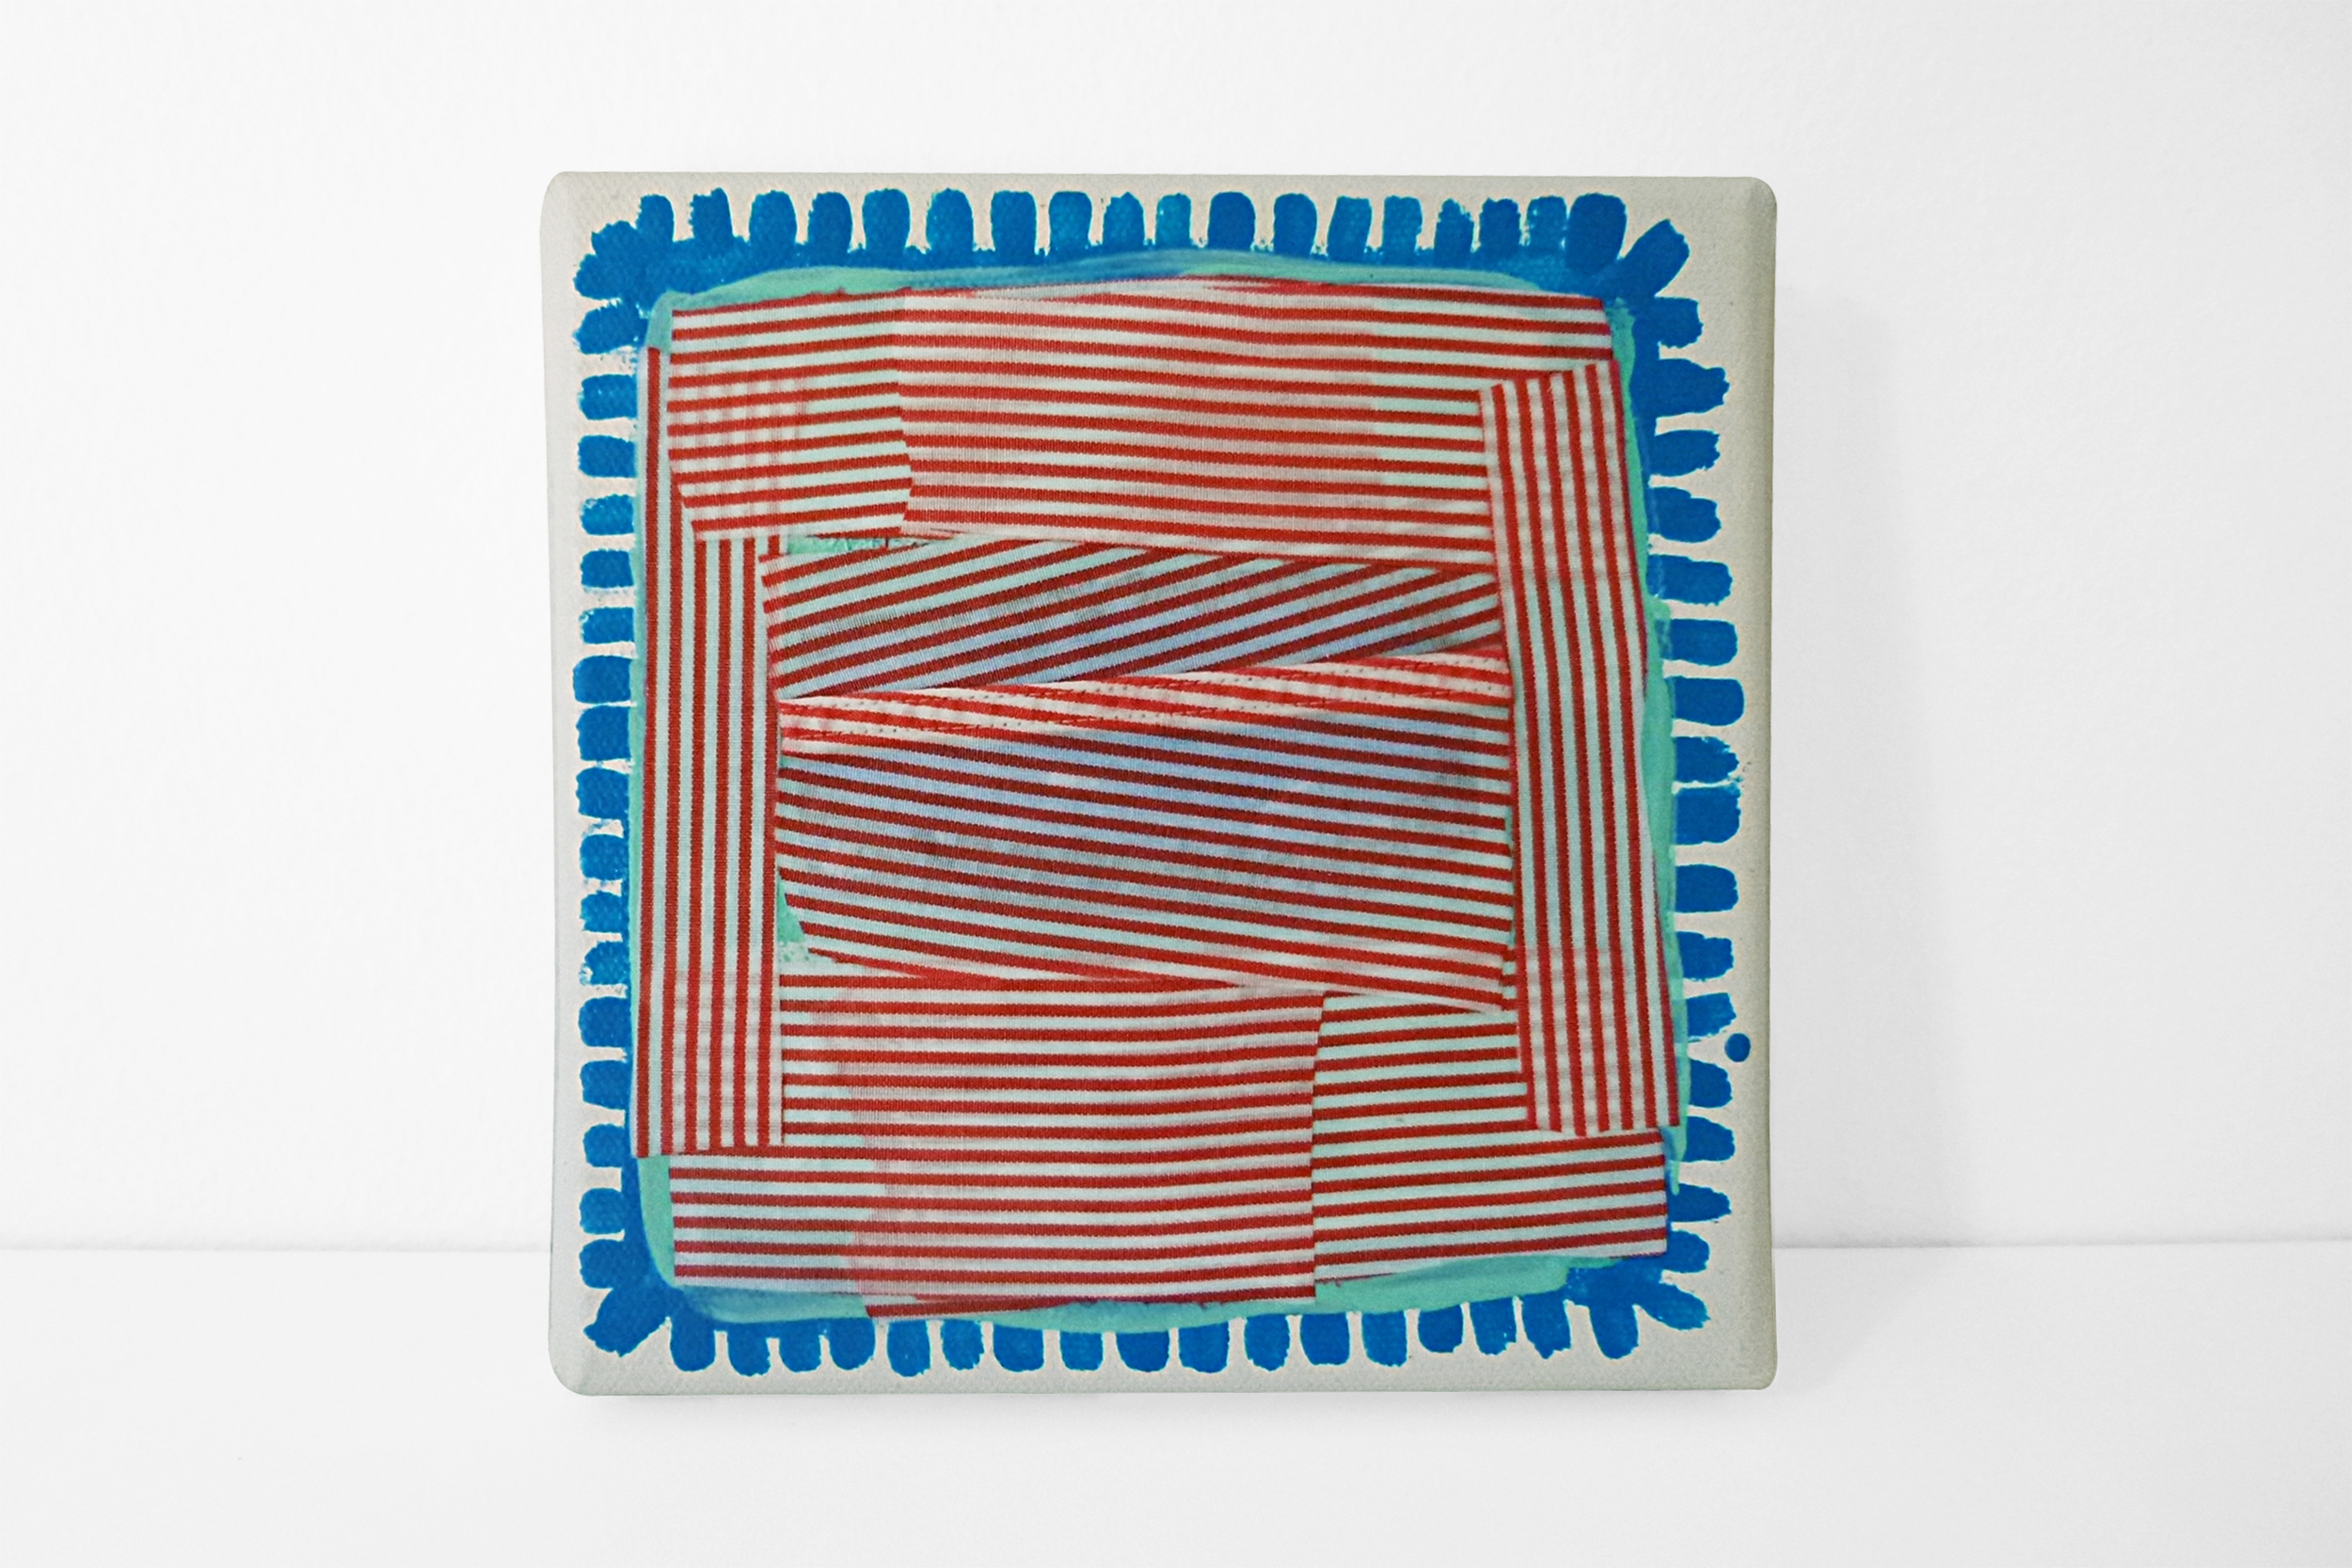  Bold Stripes, 2013 mixed media on canvas 14x14 cm / 5.5x5.5 in    